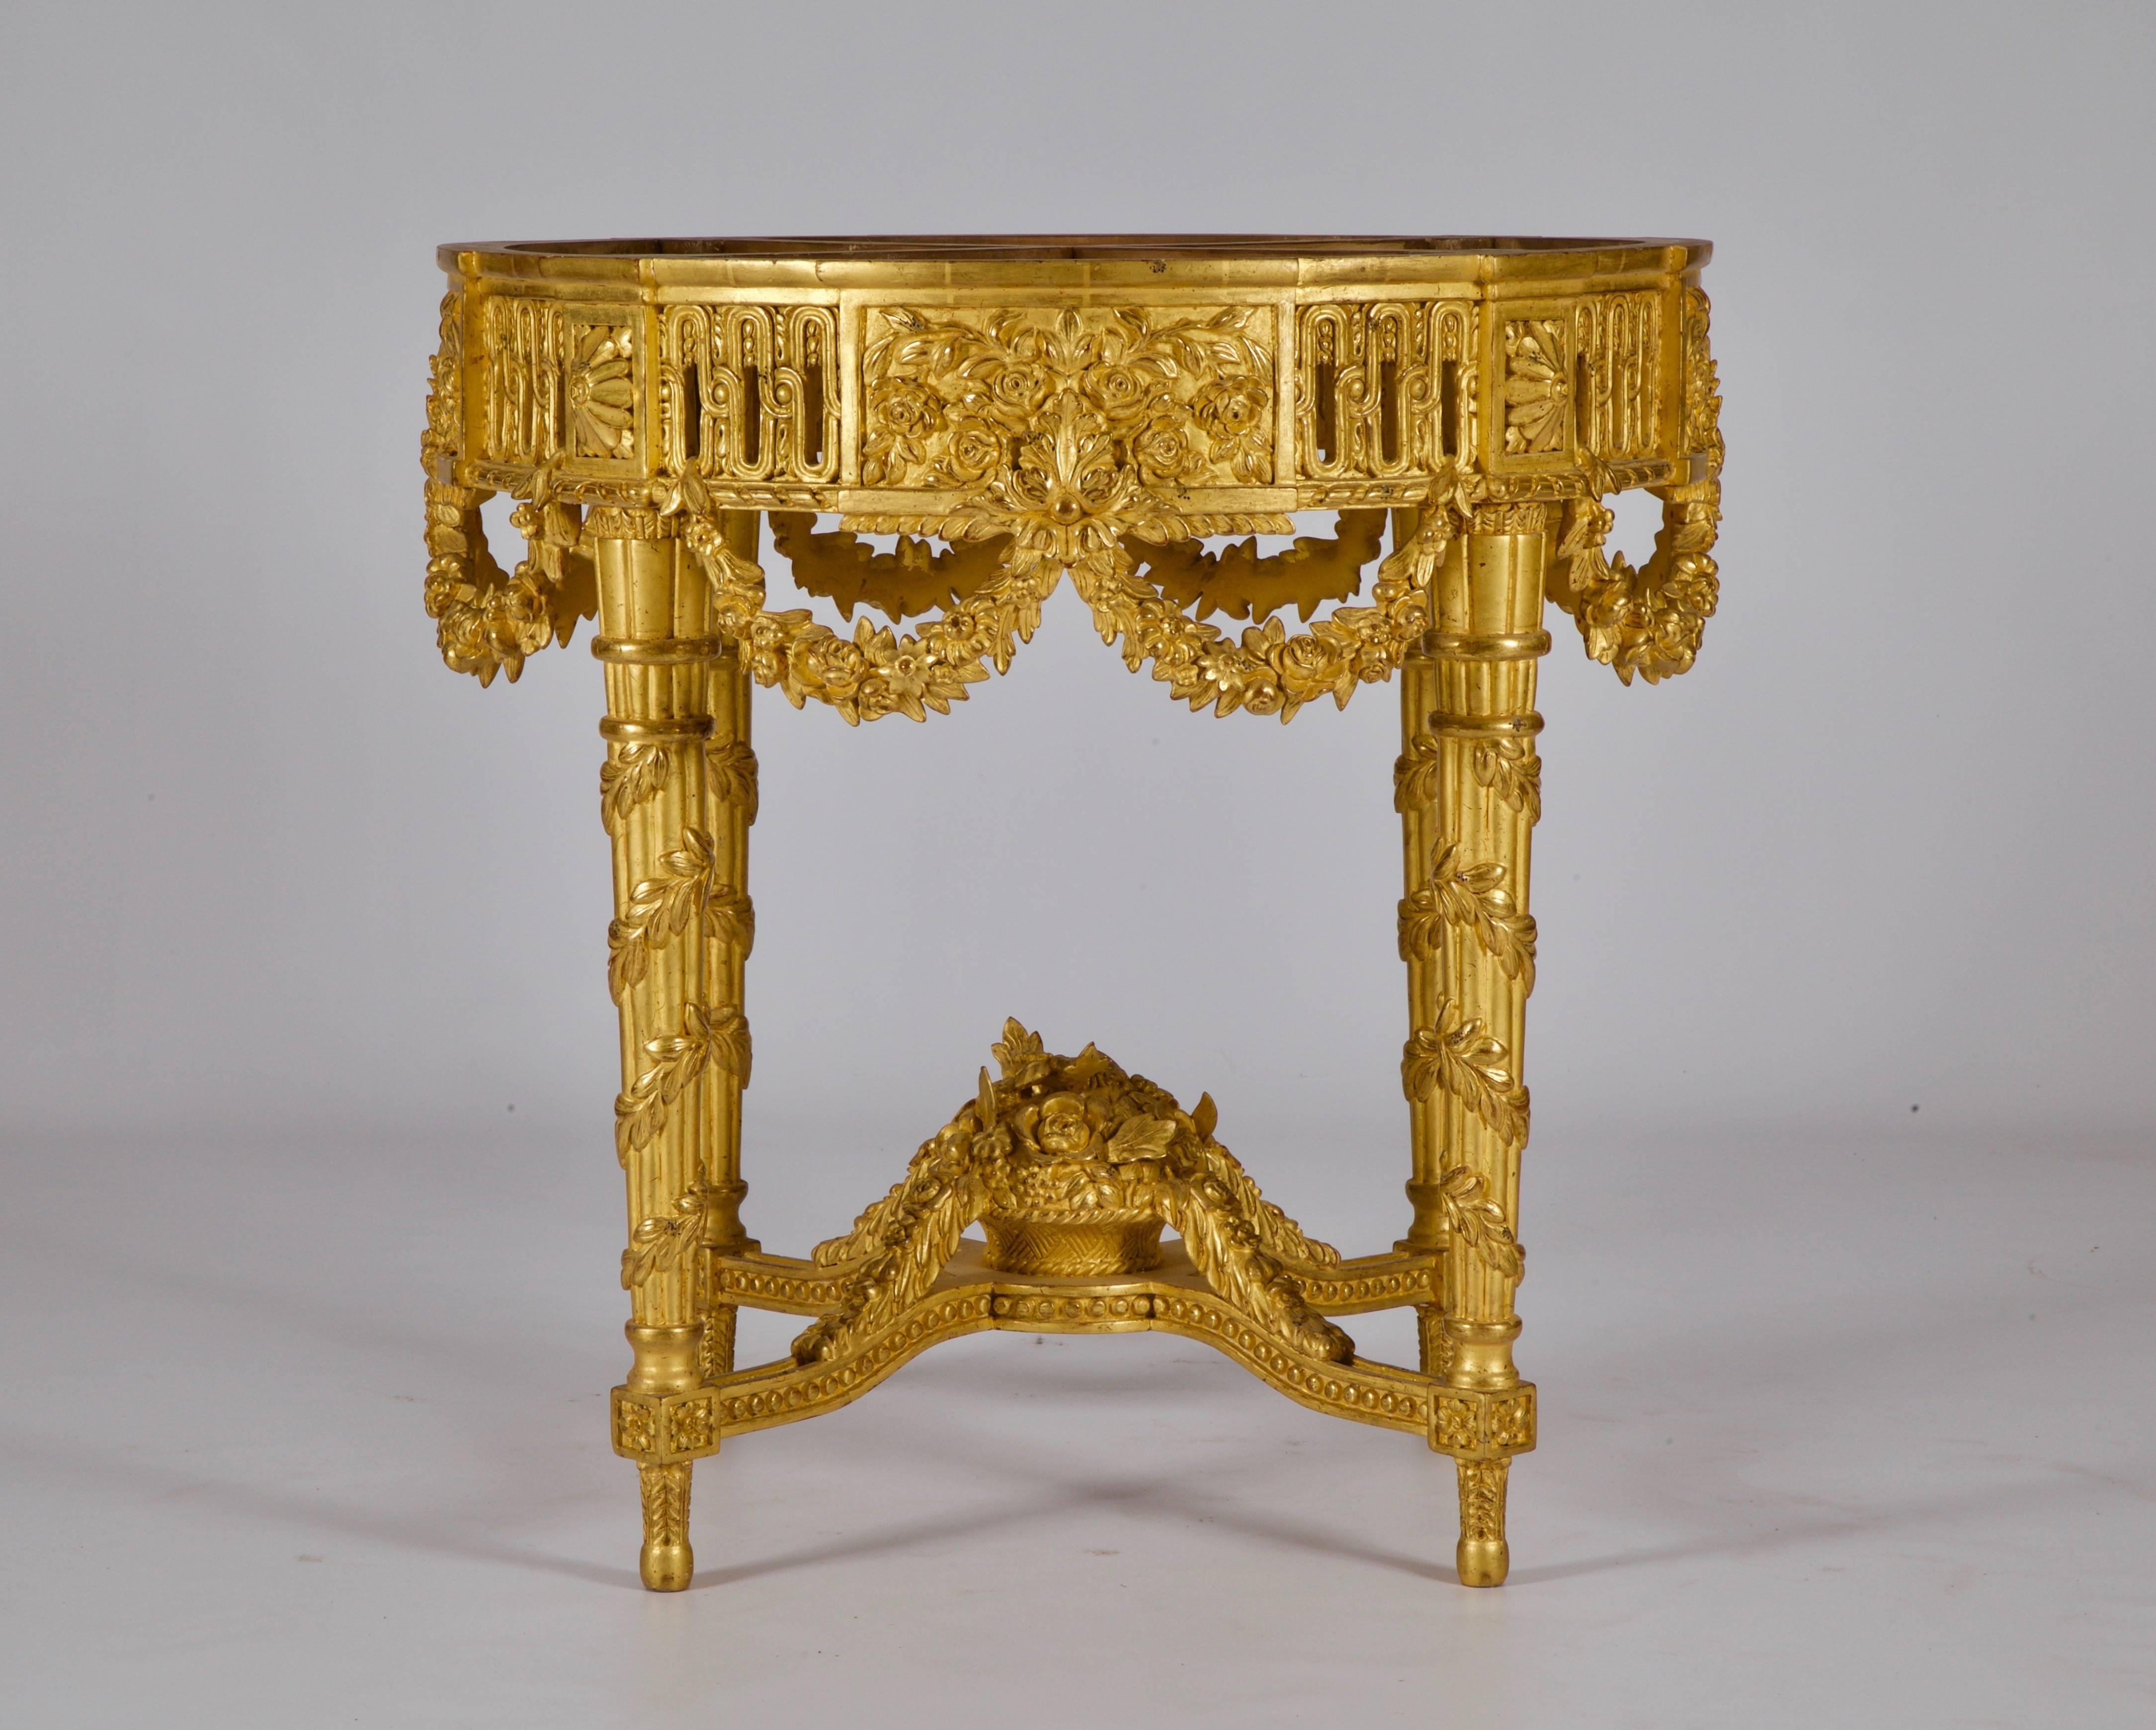 Pair of Louis XVI style round Side tables: Hand-carved by master craftsmen and hand finished in a medium, aged and distressed, water gilded patina made using 23.75 carat gold leaf.
Beveled tops can be made to order, from our marble selections, on